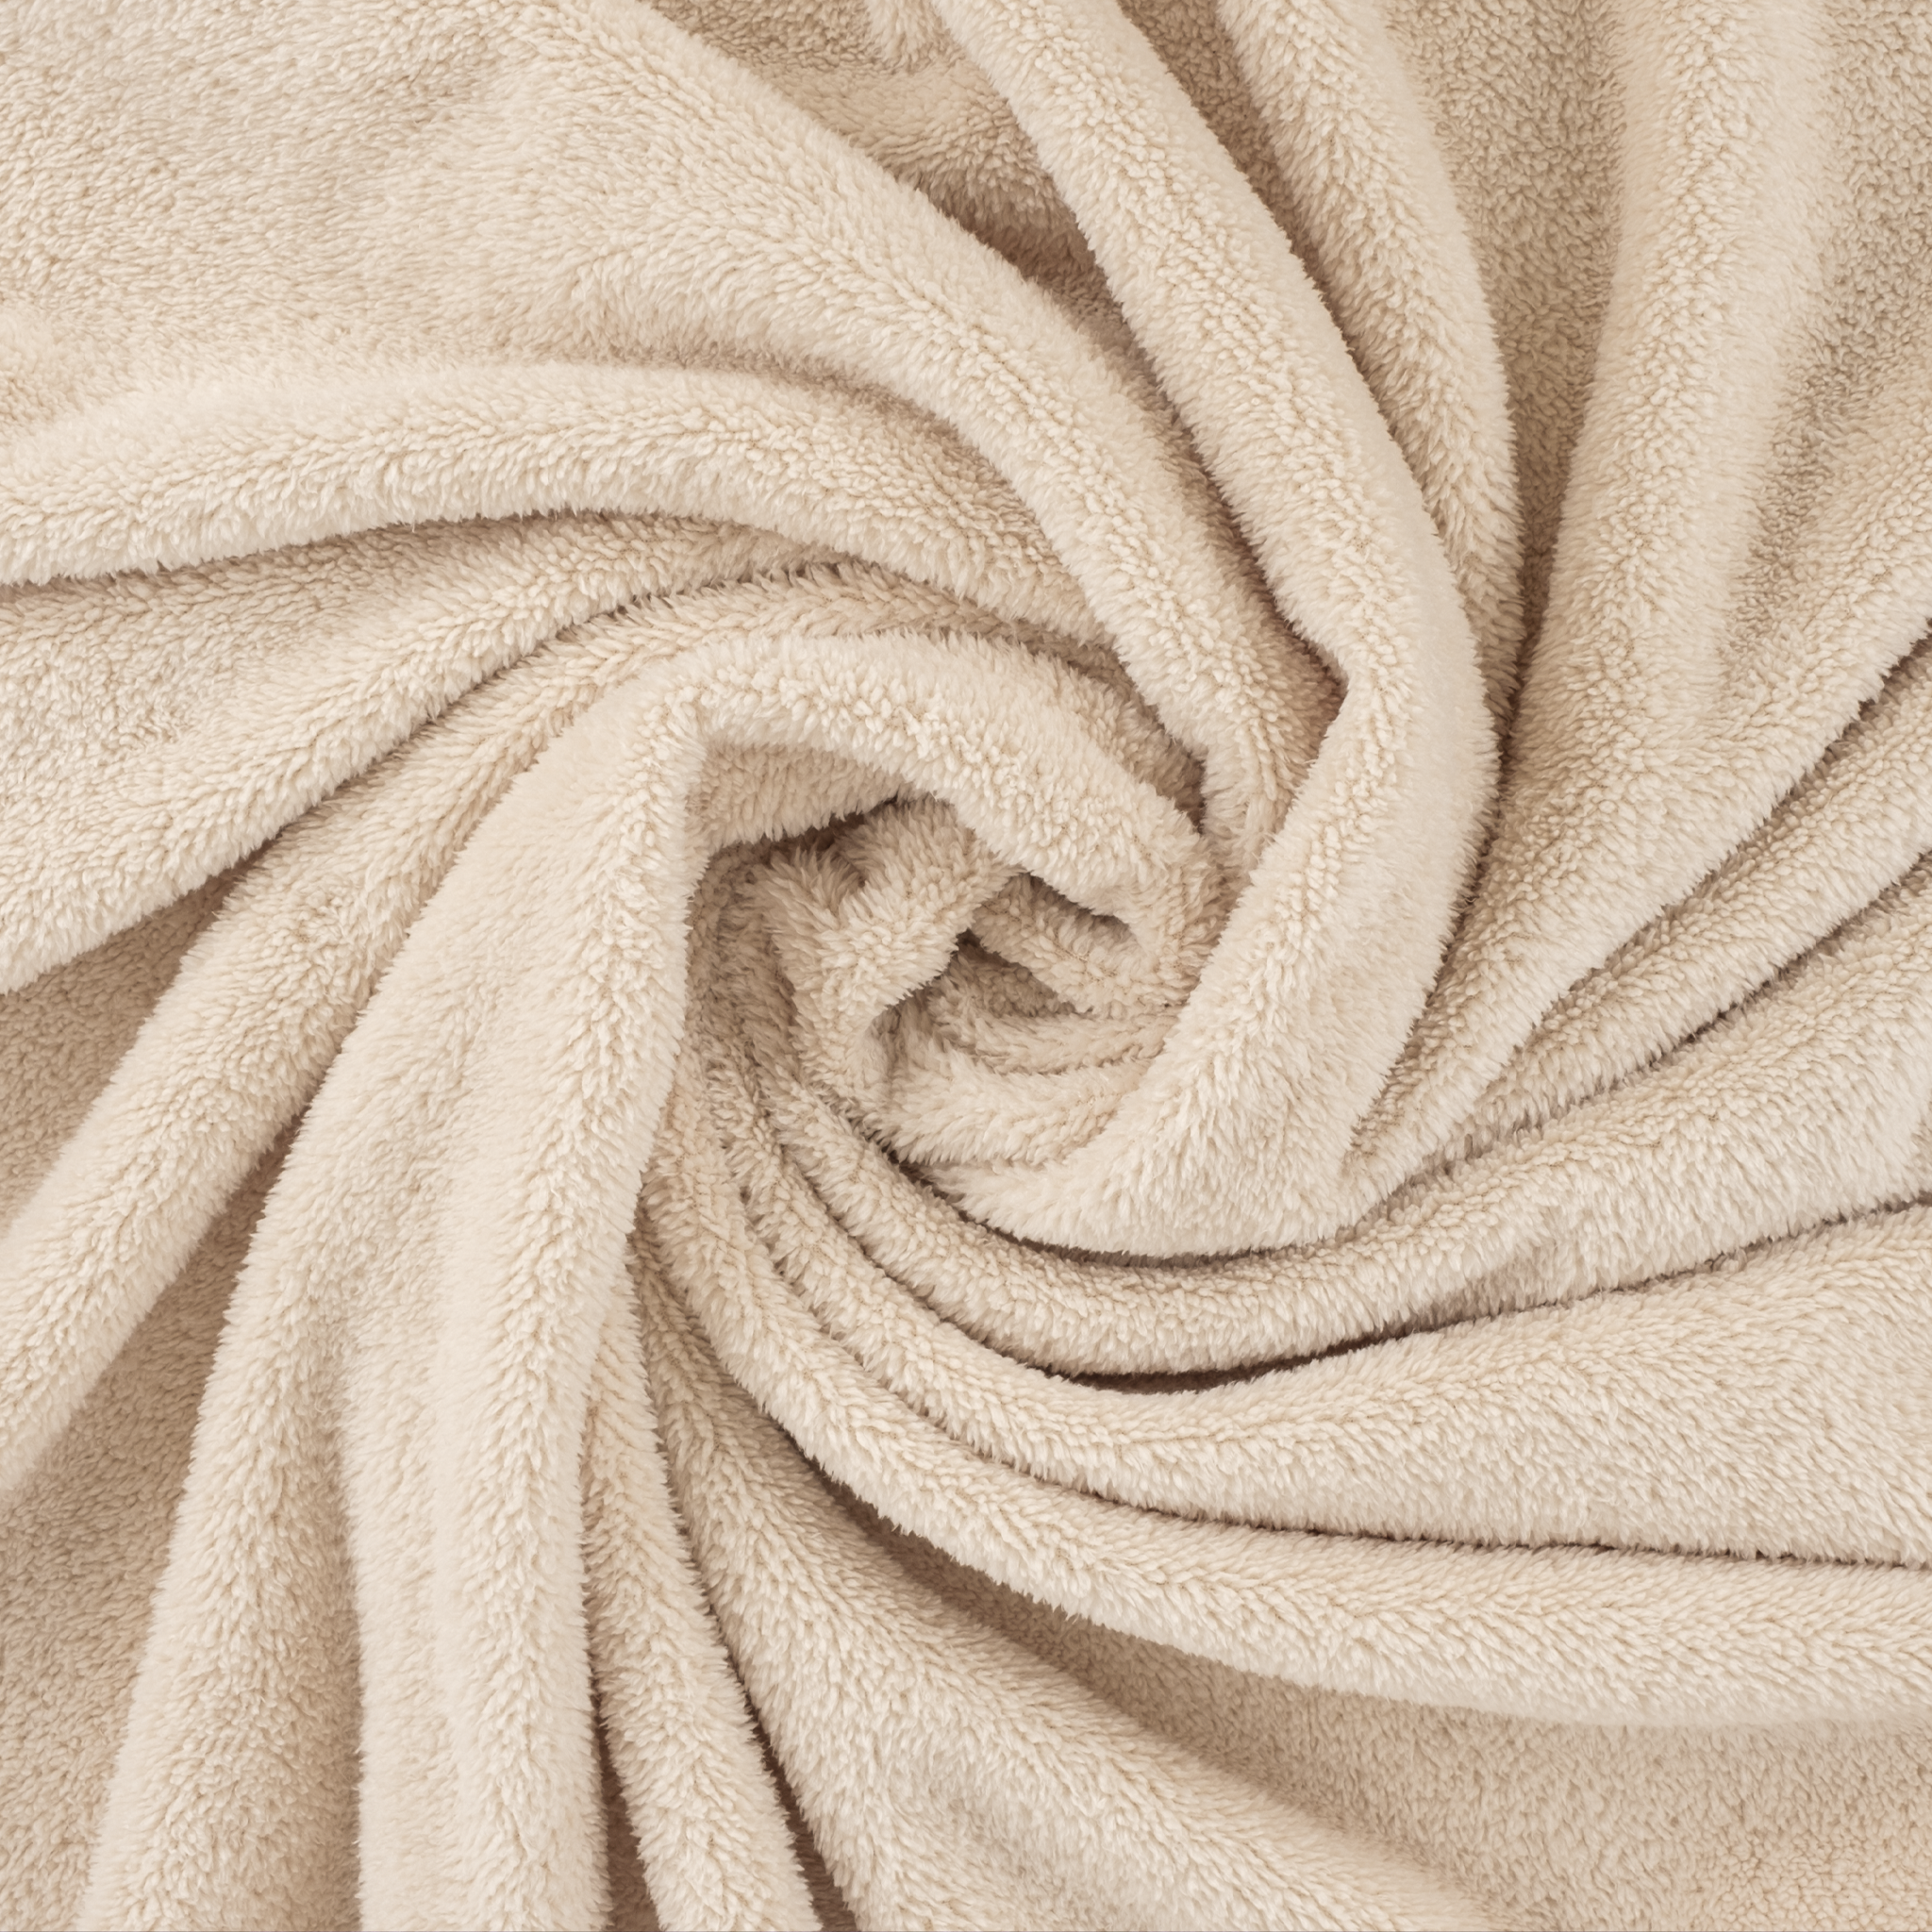 American Soft Linen - Bedding Fleece Blanket - Wholesale - 24 Set Case Pack - Throw Size 50x60 inches - Sand-Taupe - 6